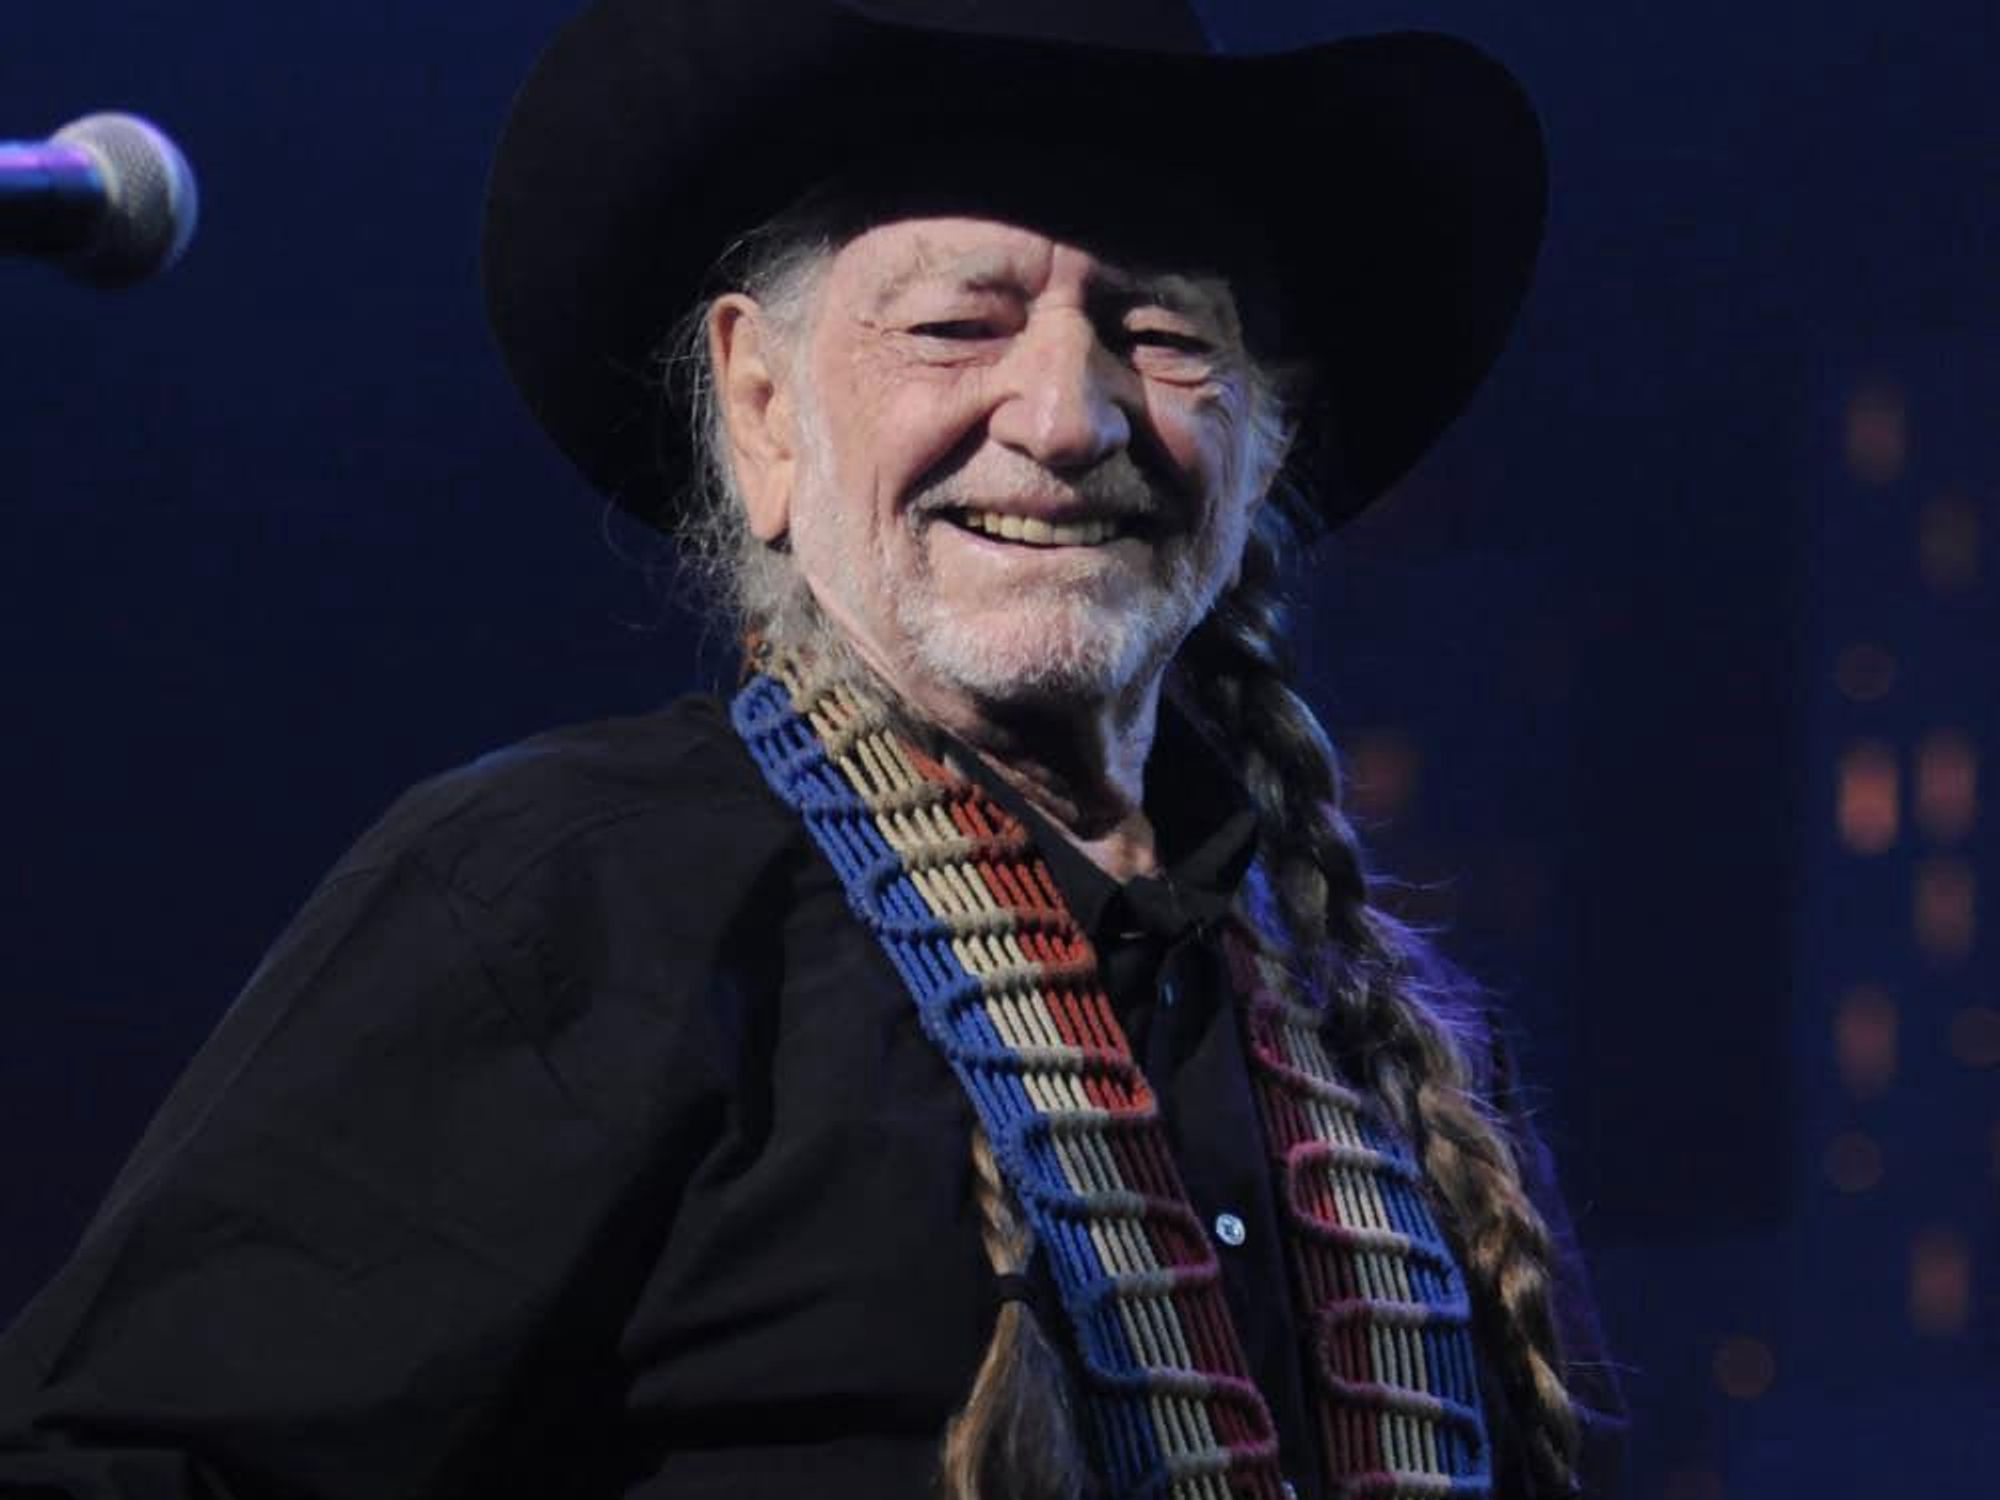 Texas legends Willie Nelson and ZZ Top team up for concert at iconic